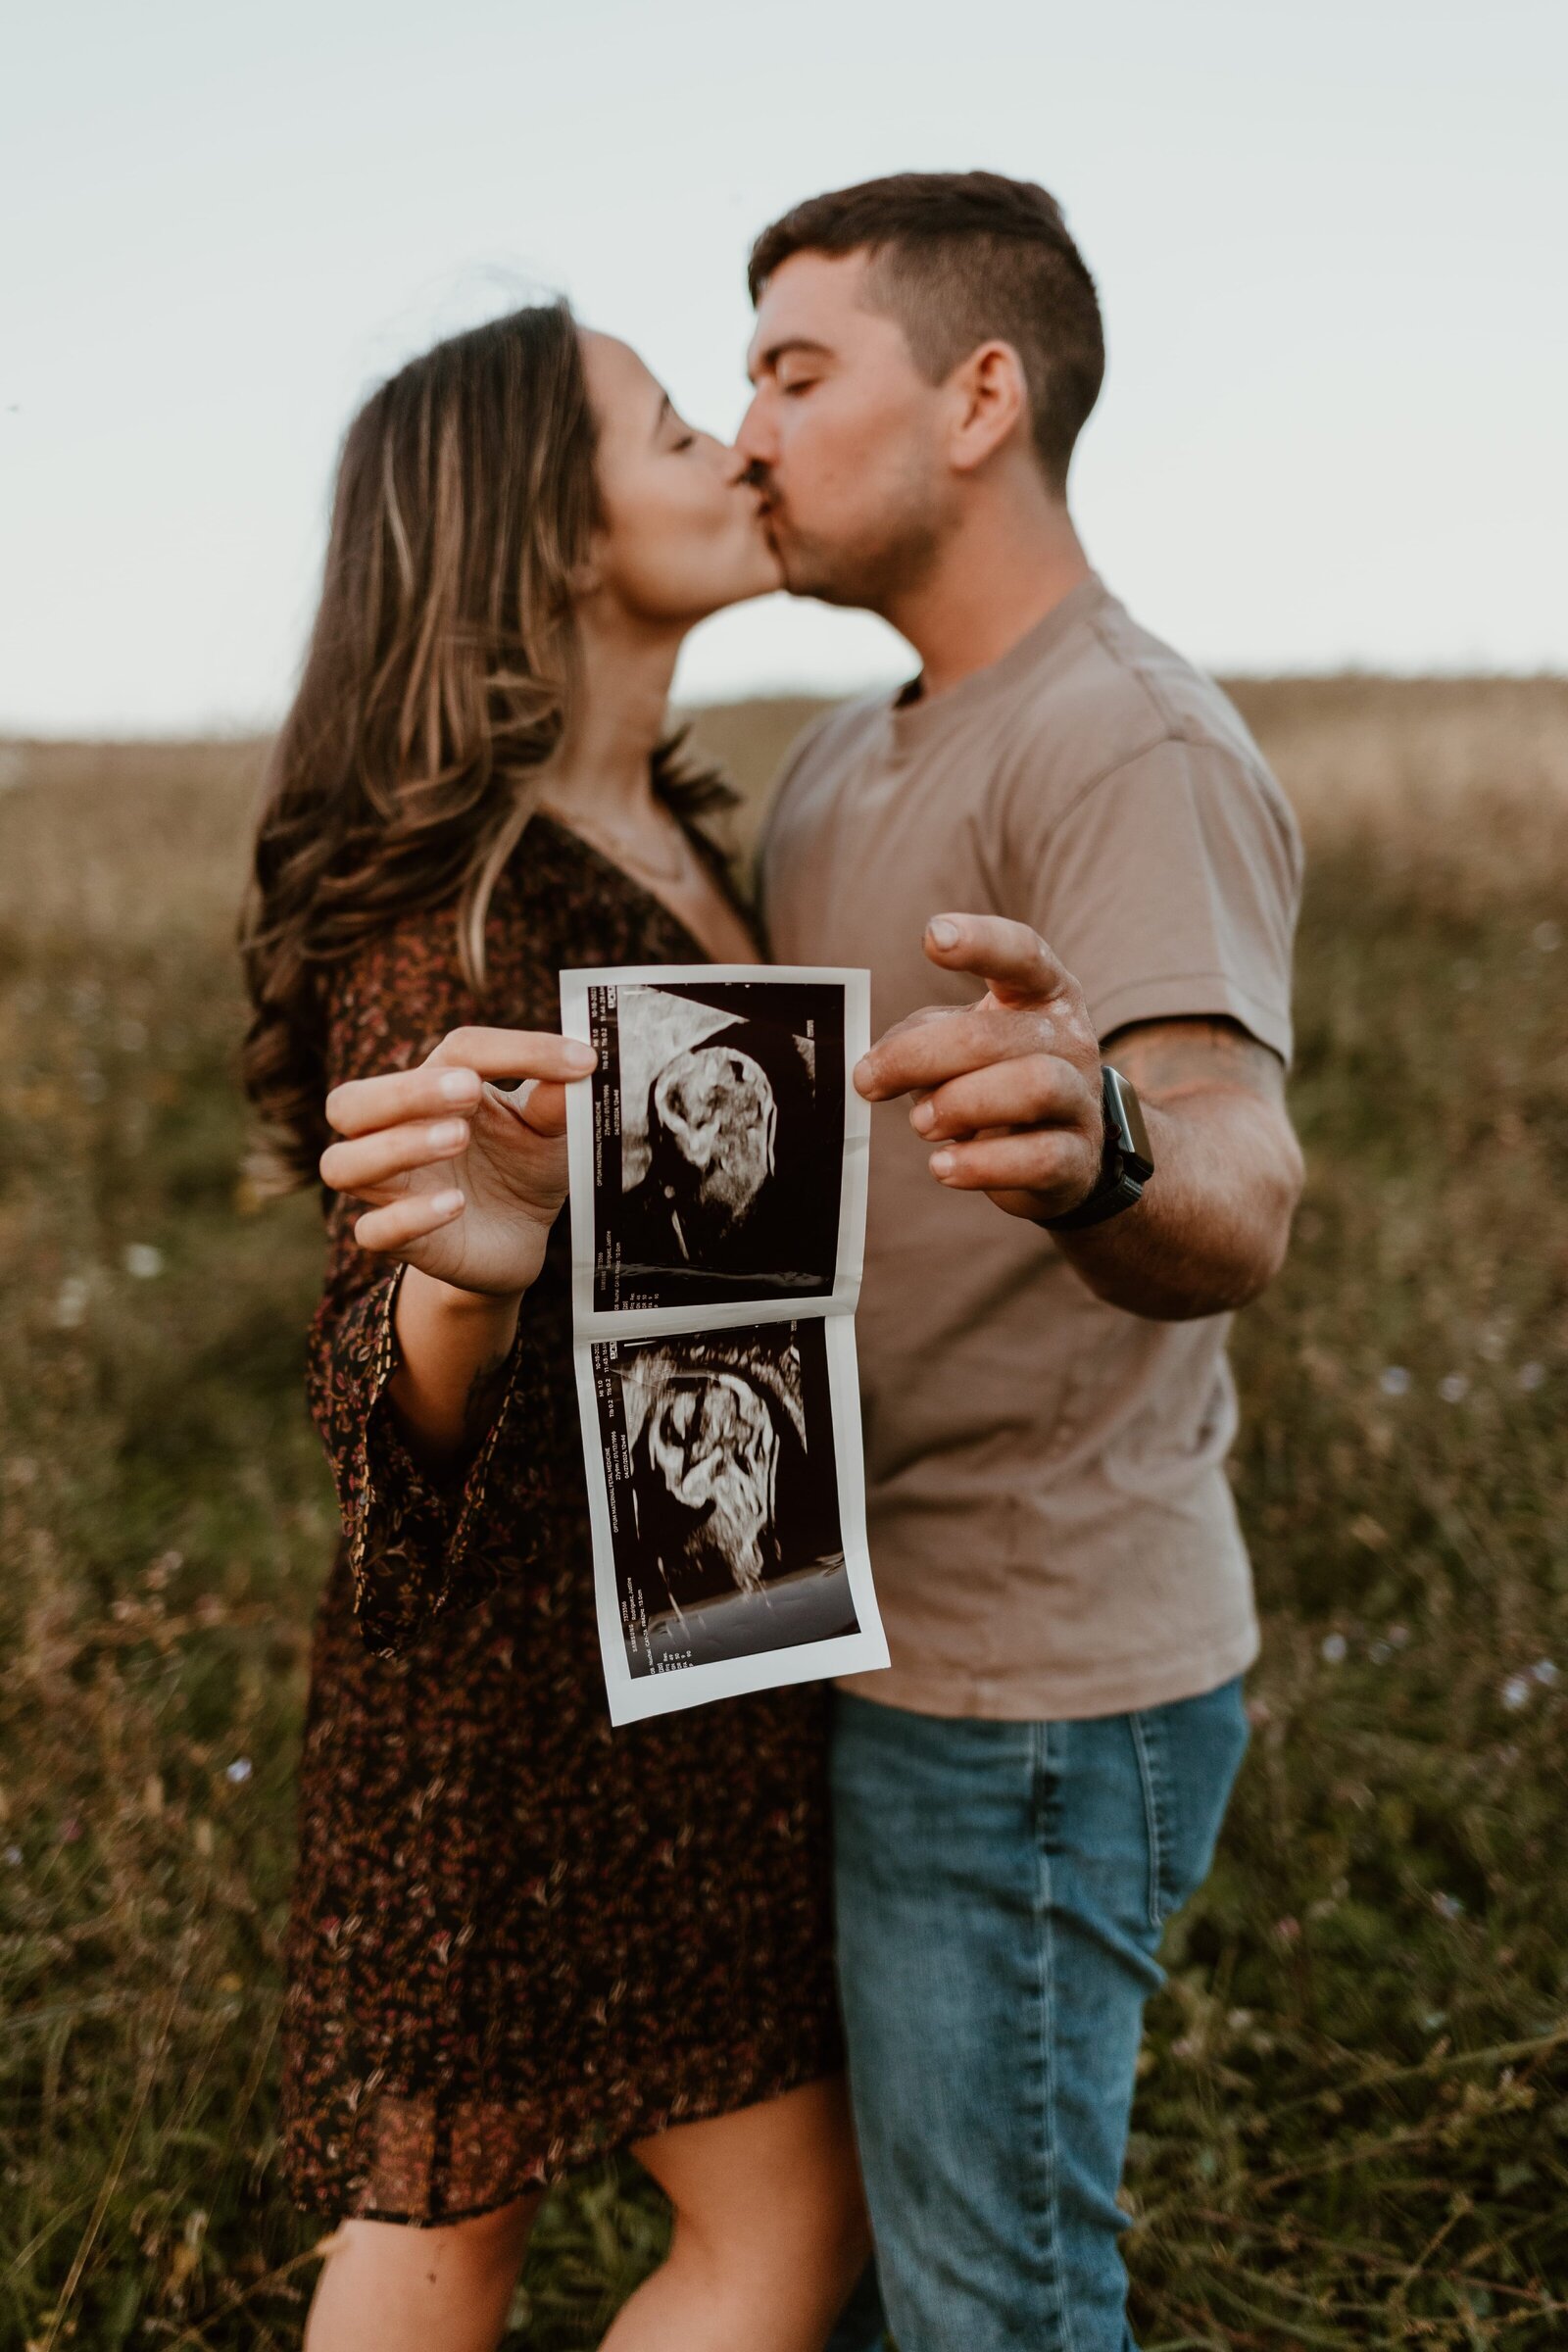 A loving couple stands in a field, sharing a kiss. The woman, dressed in a patterned dress, and the man, in a casual t-shirt and jeans, hold ultrasound images of their baby. The affectionate pose and natural backdrop convey a sense of anticipation and joy for their future together as parents.